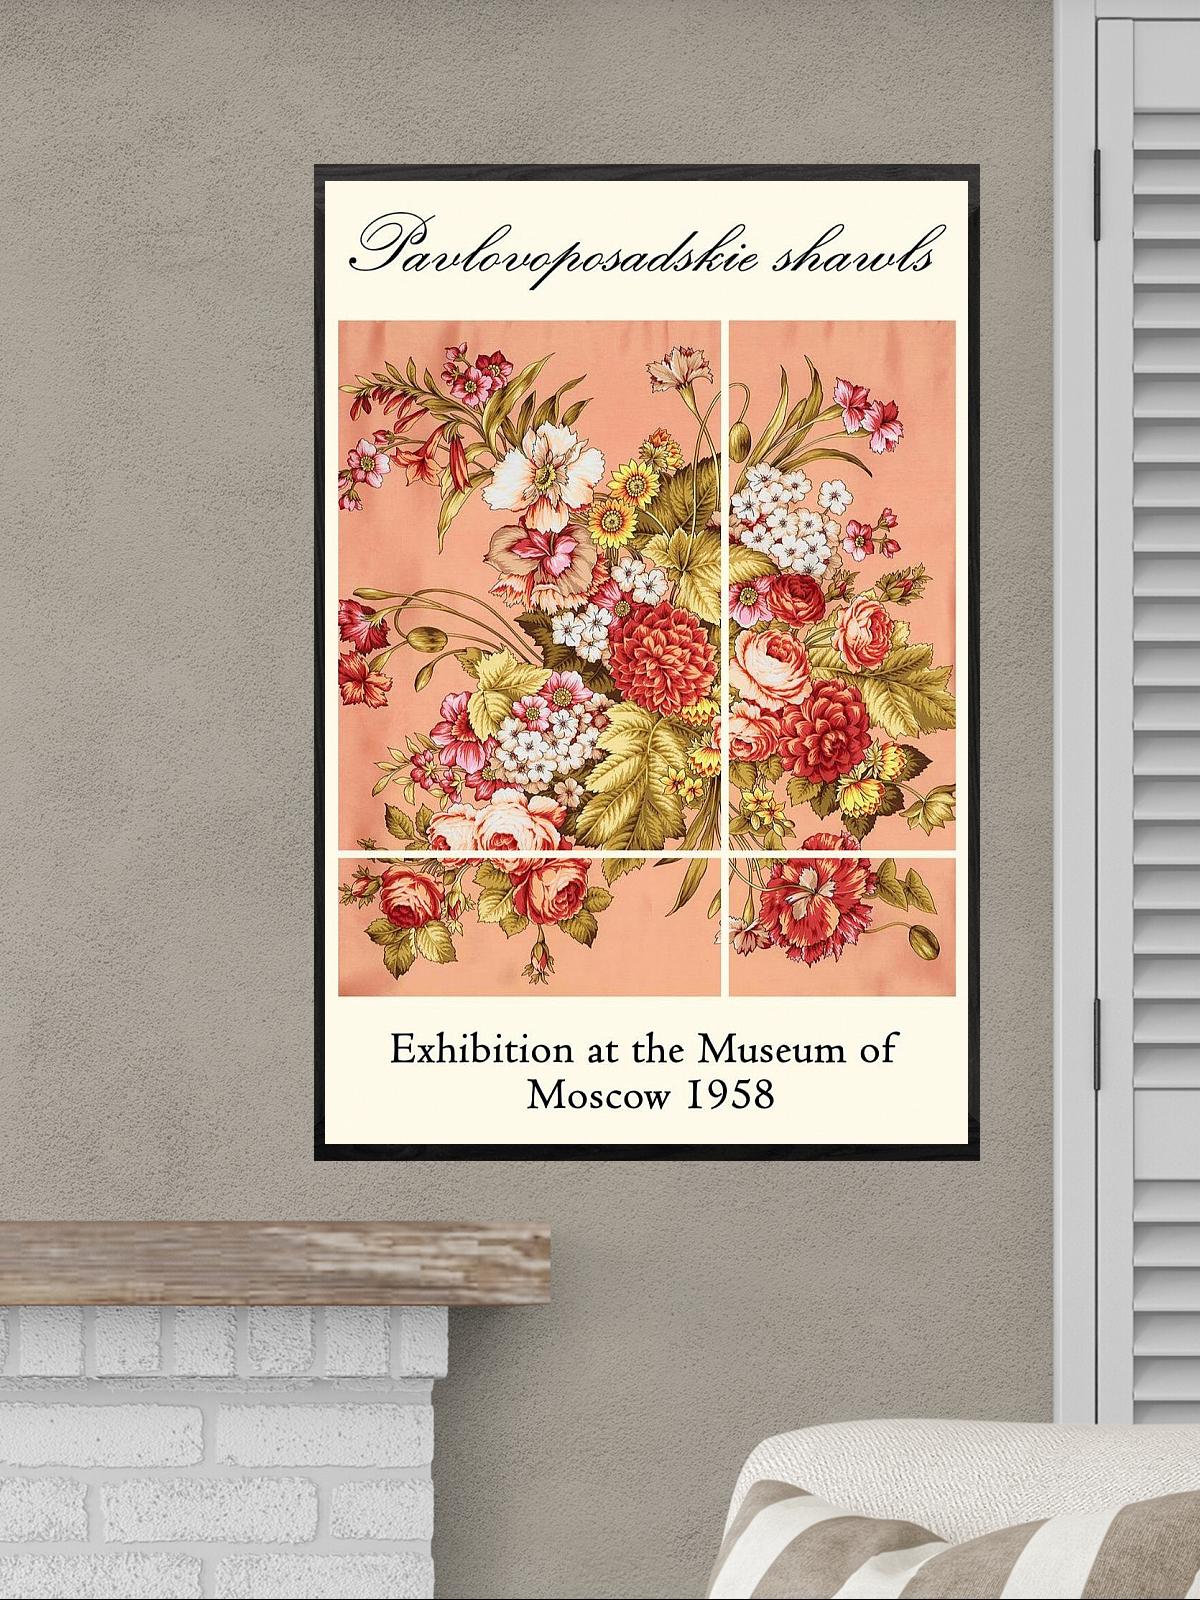 Pavlovoposadskie shawls – Bouquet of flowers Poster – wow-posters.co.uk